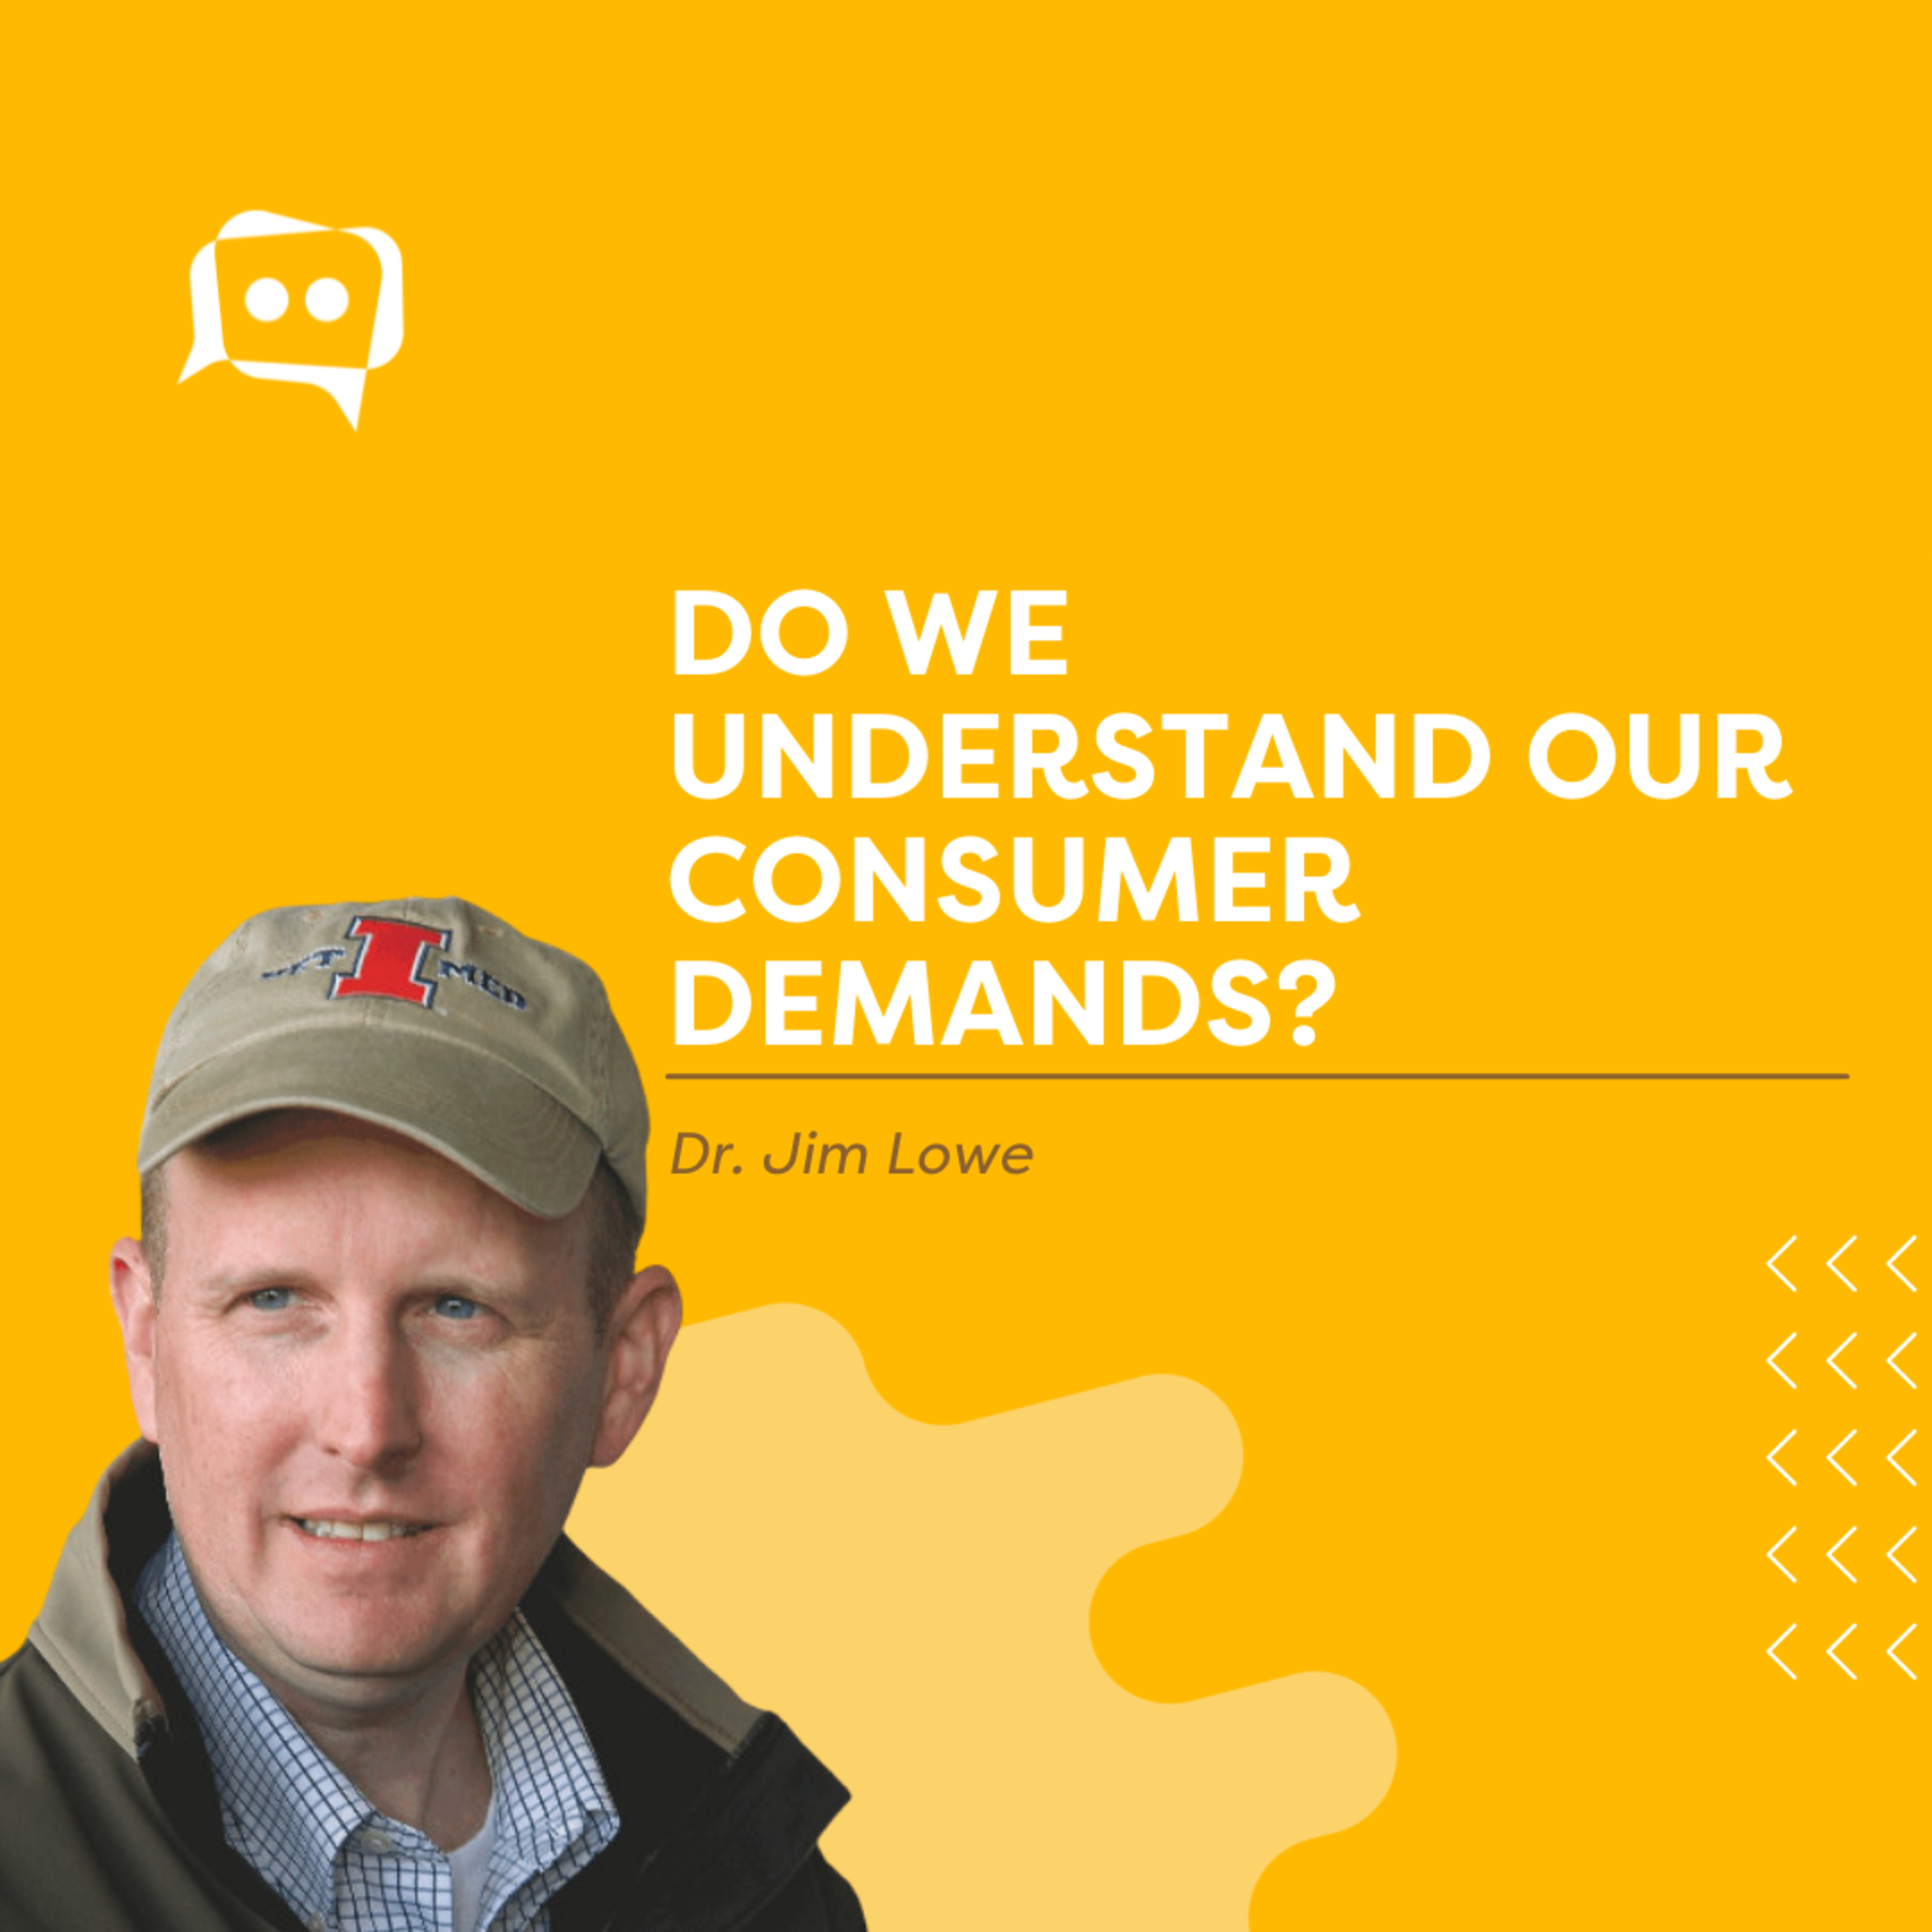 #SHORTS: Do we understand our consumer demands? With Dr. Jim Lowe